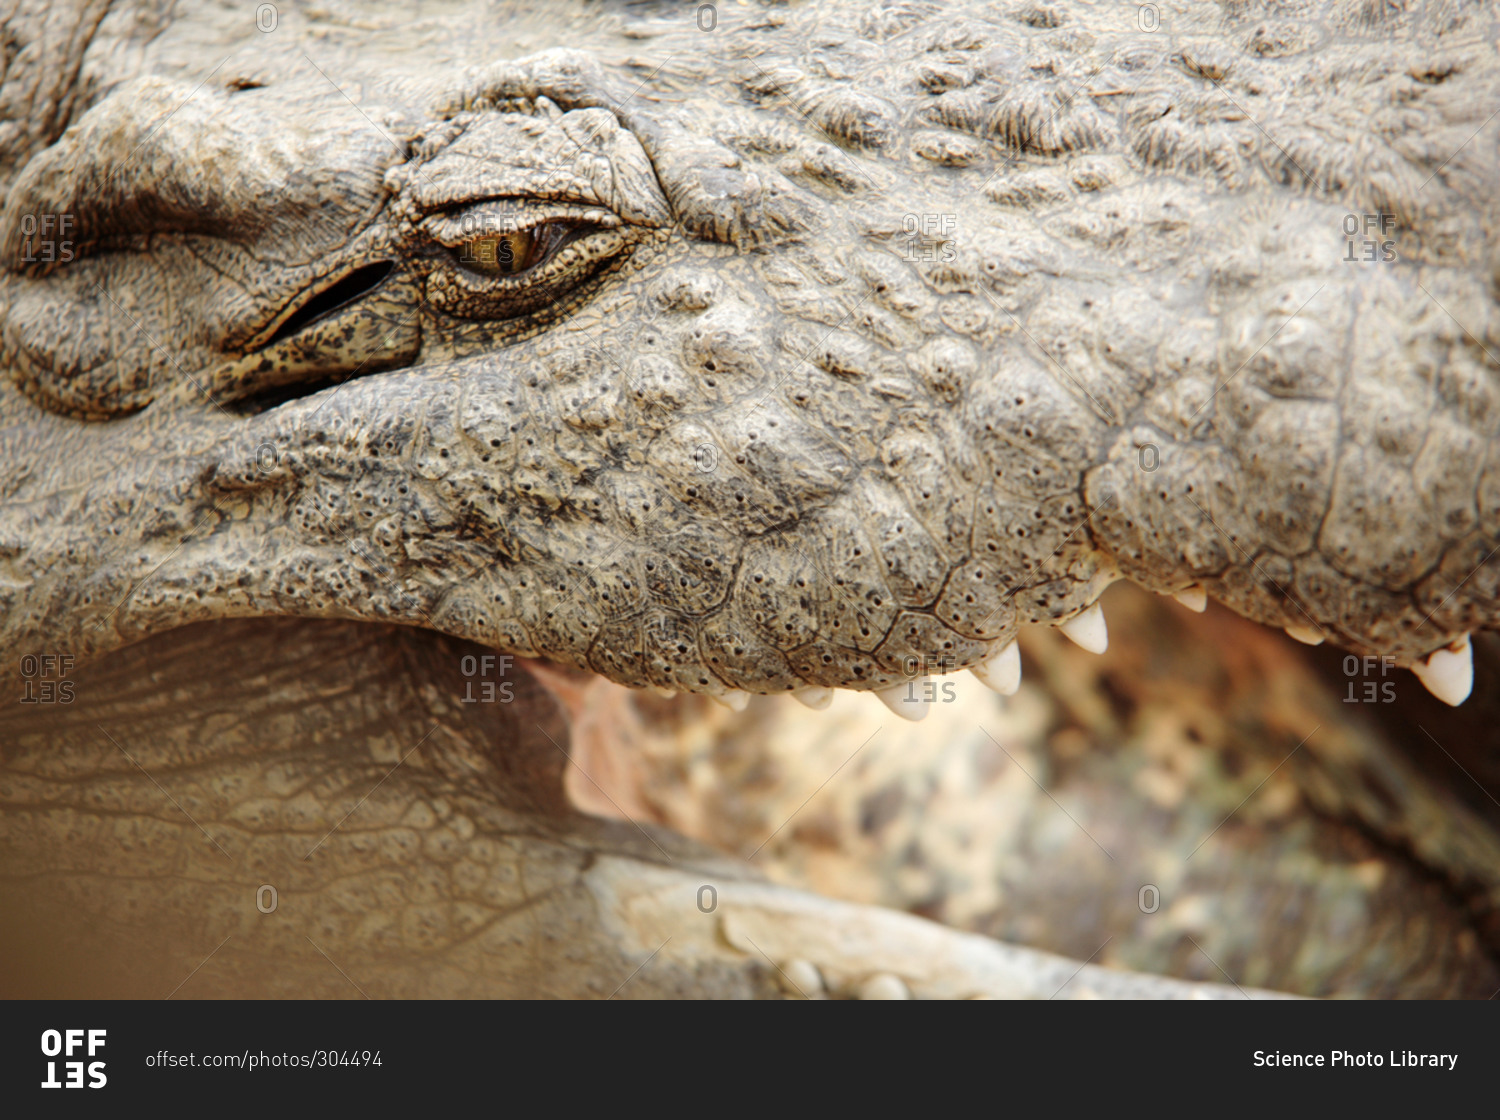 Nile crocodile (Crocodylus niloticus) cooling itself by drawing cool air into its body, Mpumulanga, South Africa